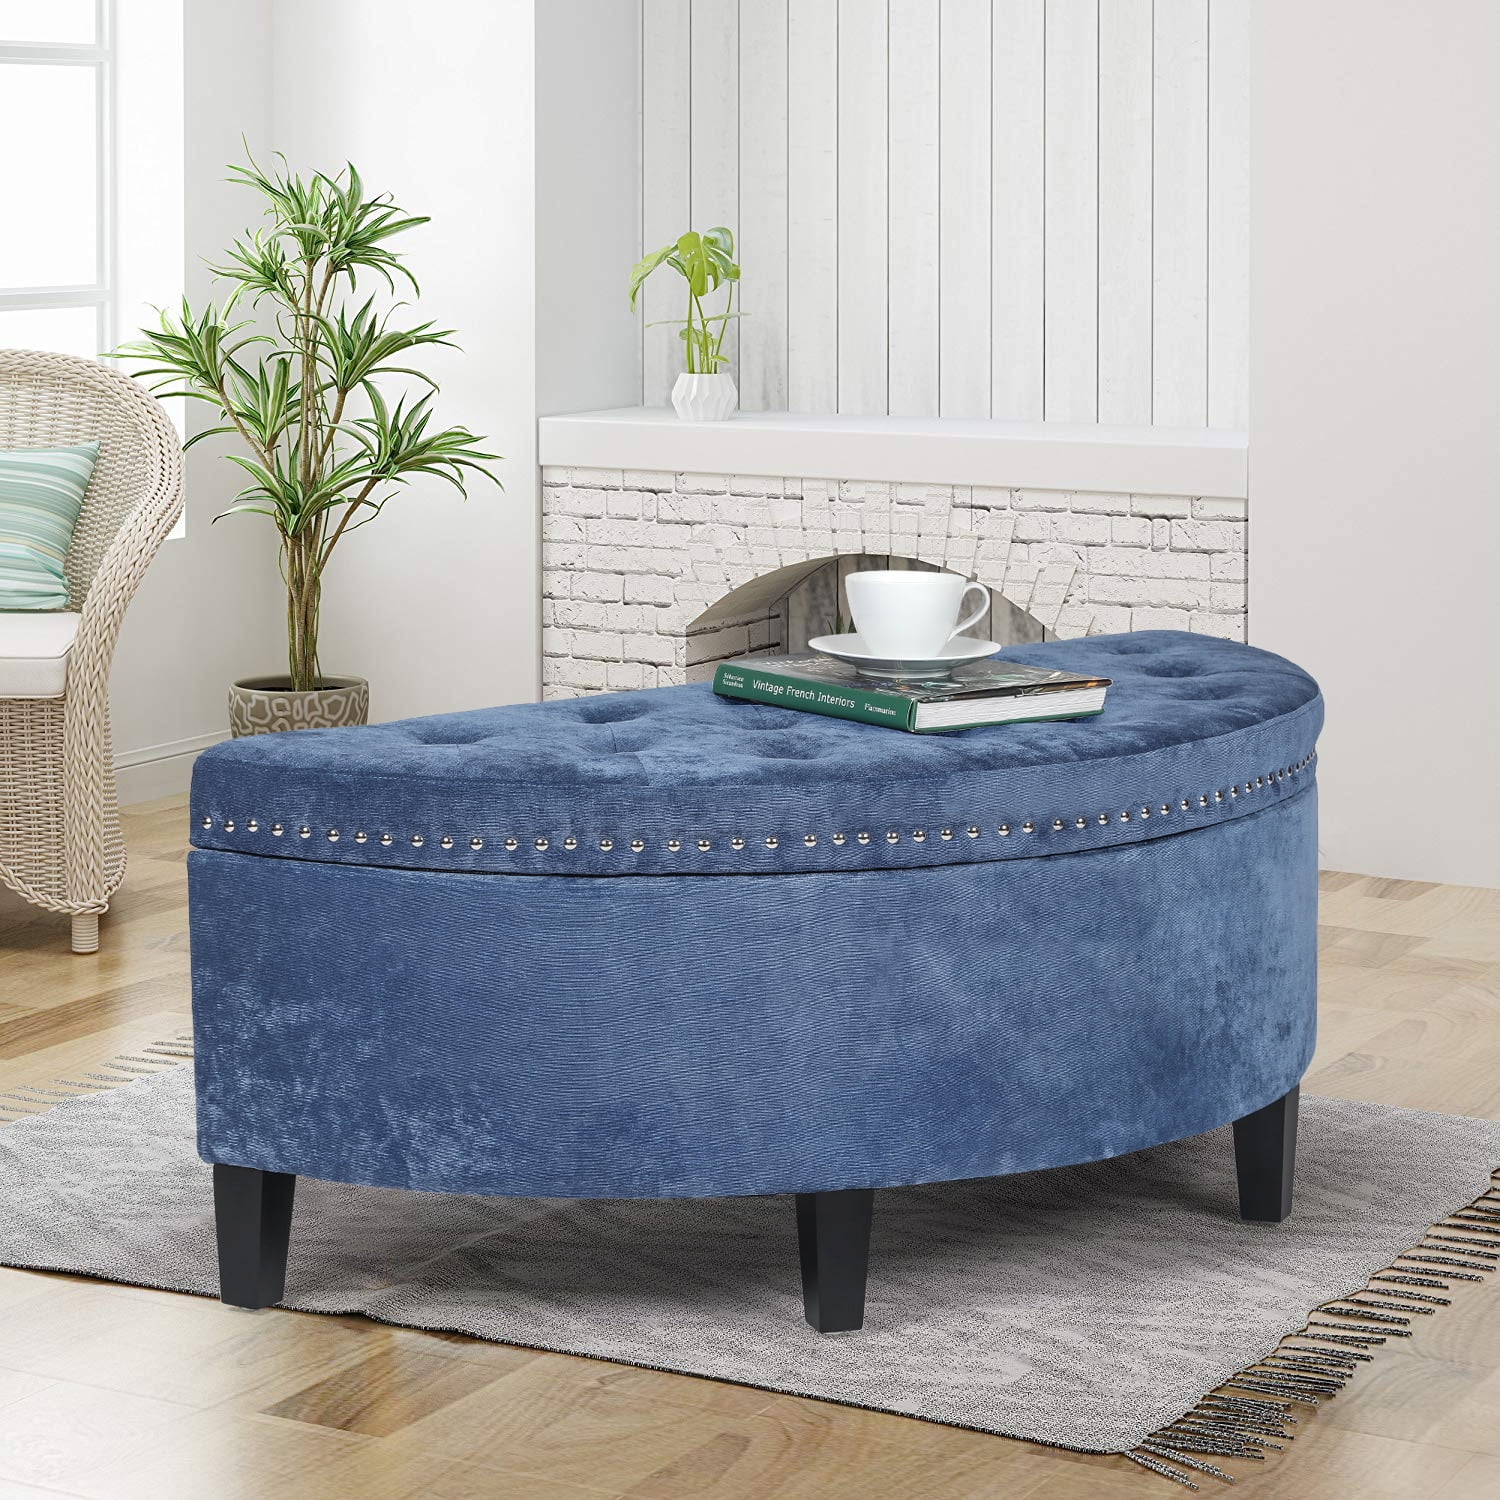 Joveco Tufted Lift Top Storage Ottoman, Leather Storage Ottoman Bench Tufted Footrest Lift Top